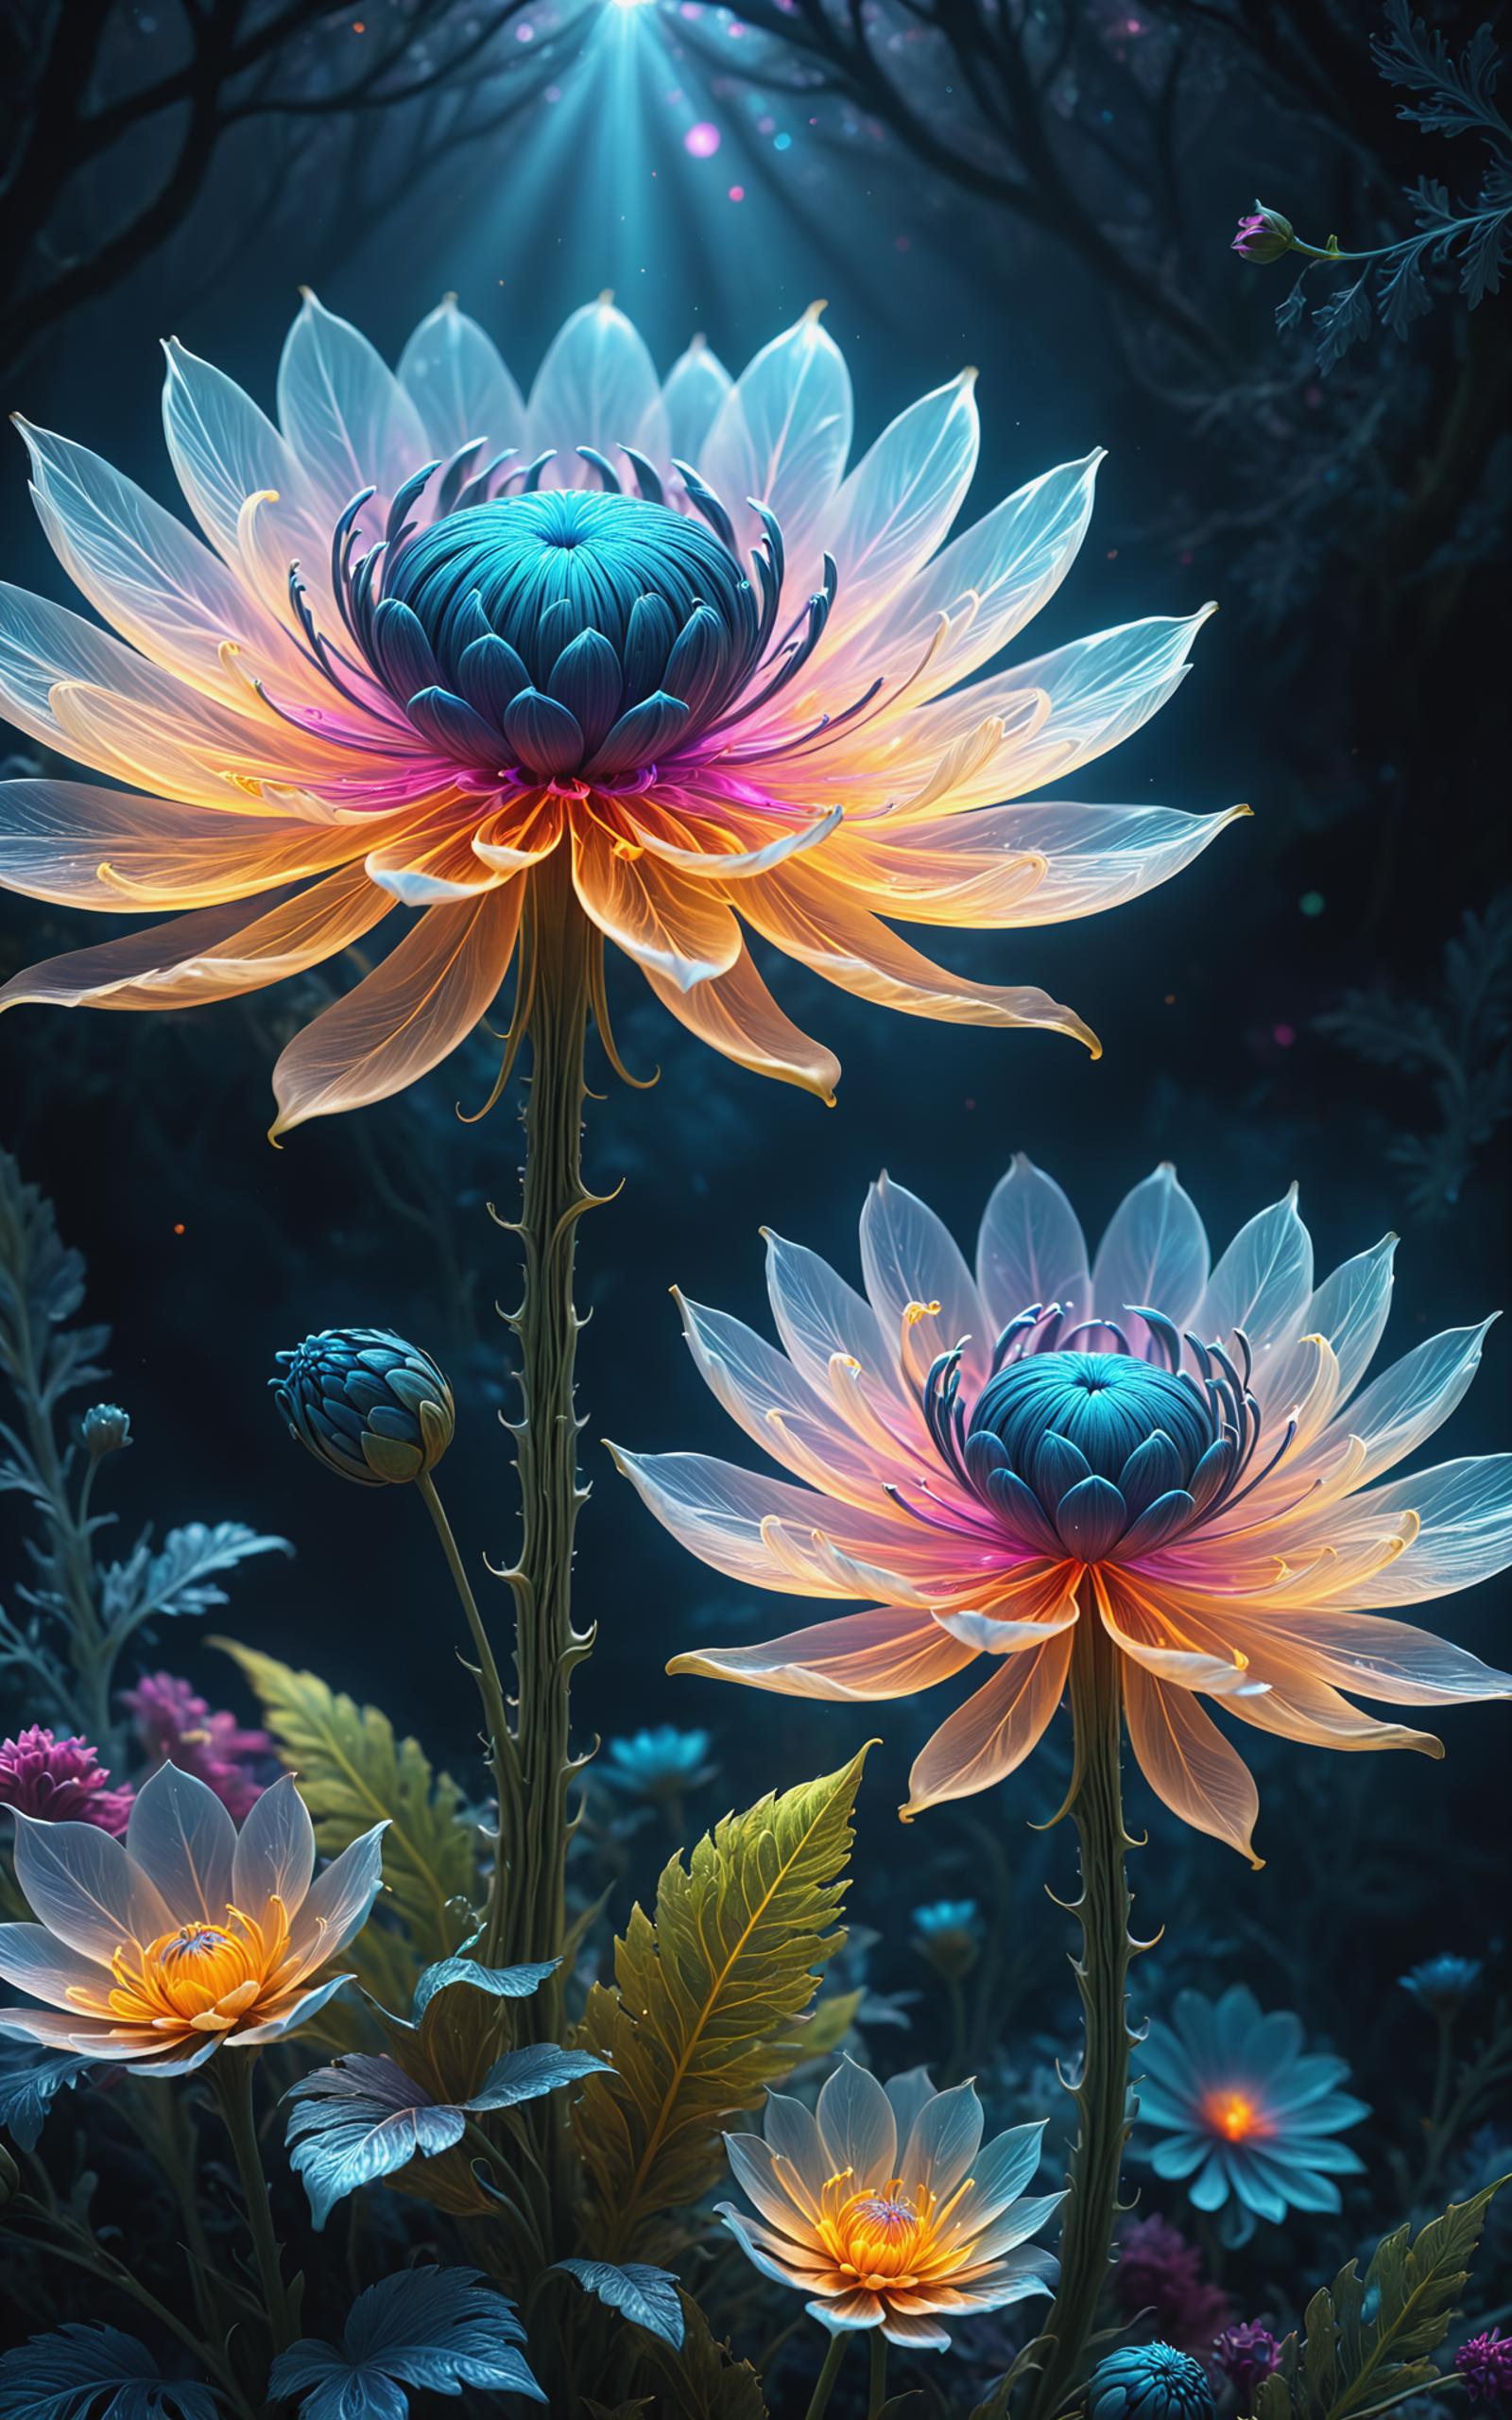 A vibrant digital artwork featuring two large, colorful flowers with blue and pink petals, surrounded by smaller flowers and green leaves. The flowers are set against a dark background, creating a striking contrast between the vivid colors of the flowers and the darker tones of the background. The artwork showcases the beauty and intricacy of the flowers, with their delicate petals and intricate details.